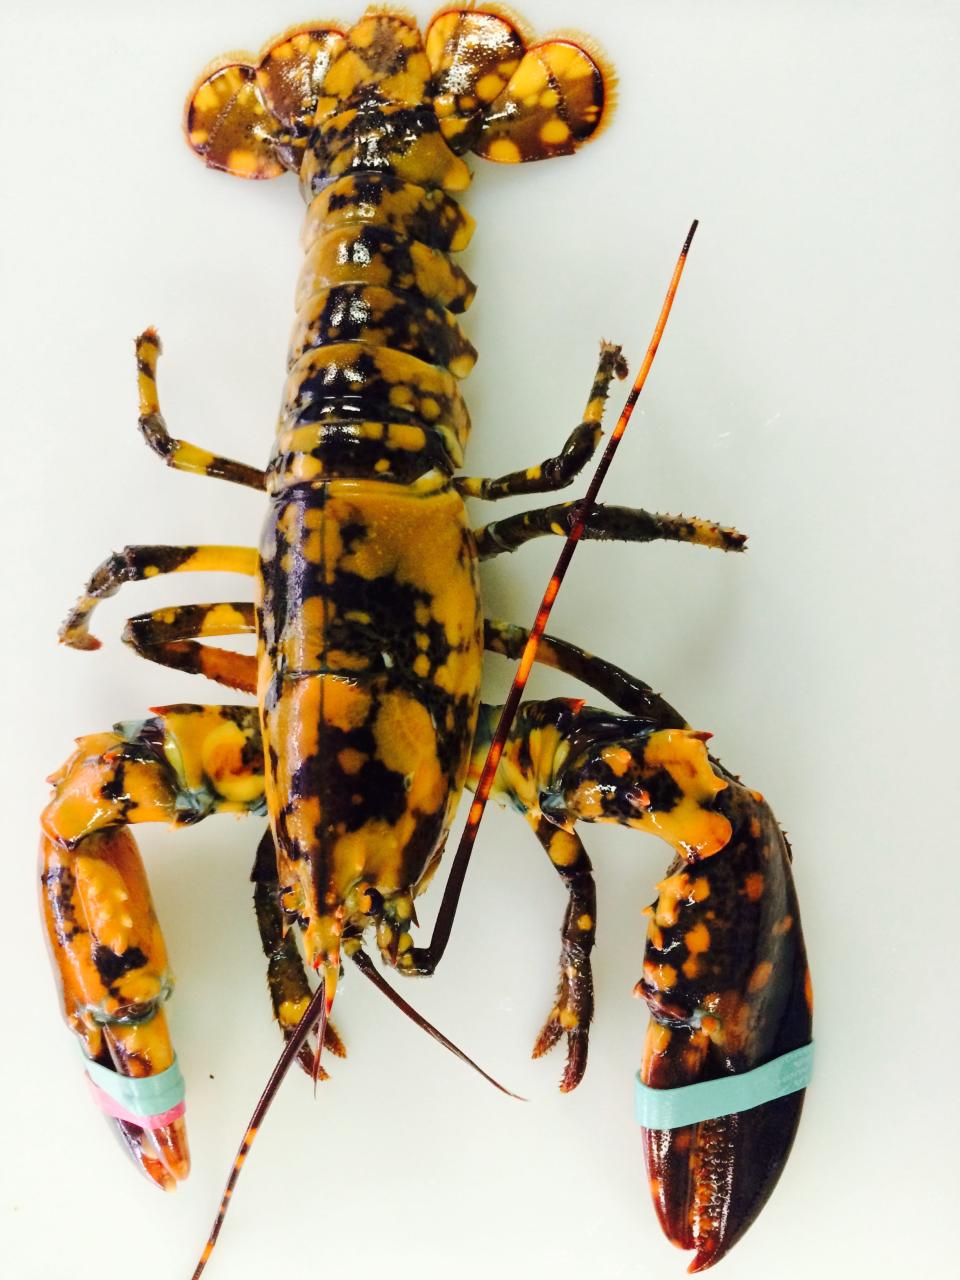 A calico lobster is known for its distinctive black and orange mottled color pattern.